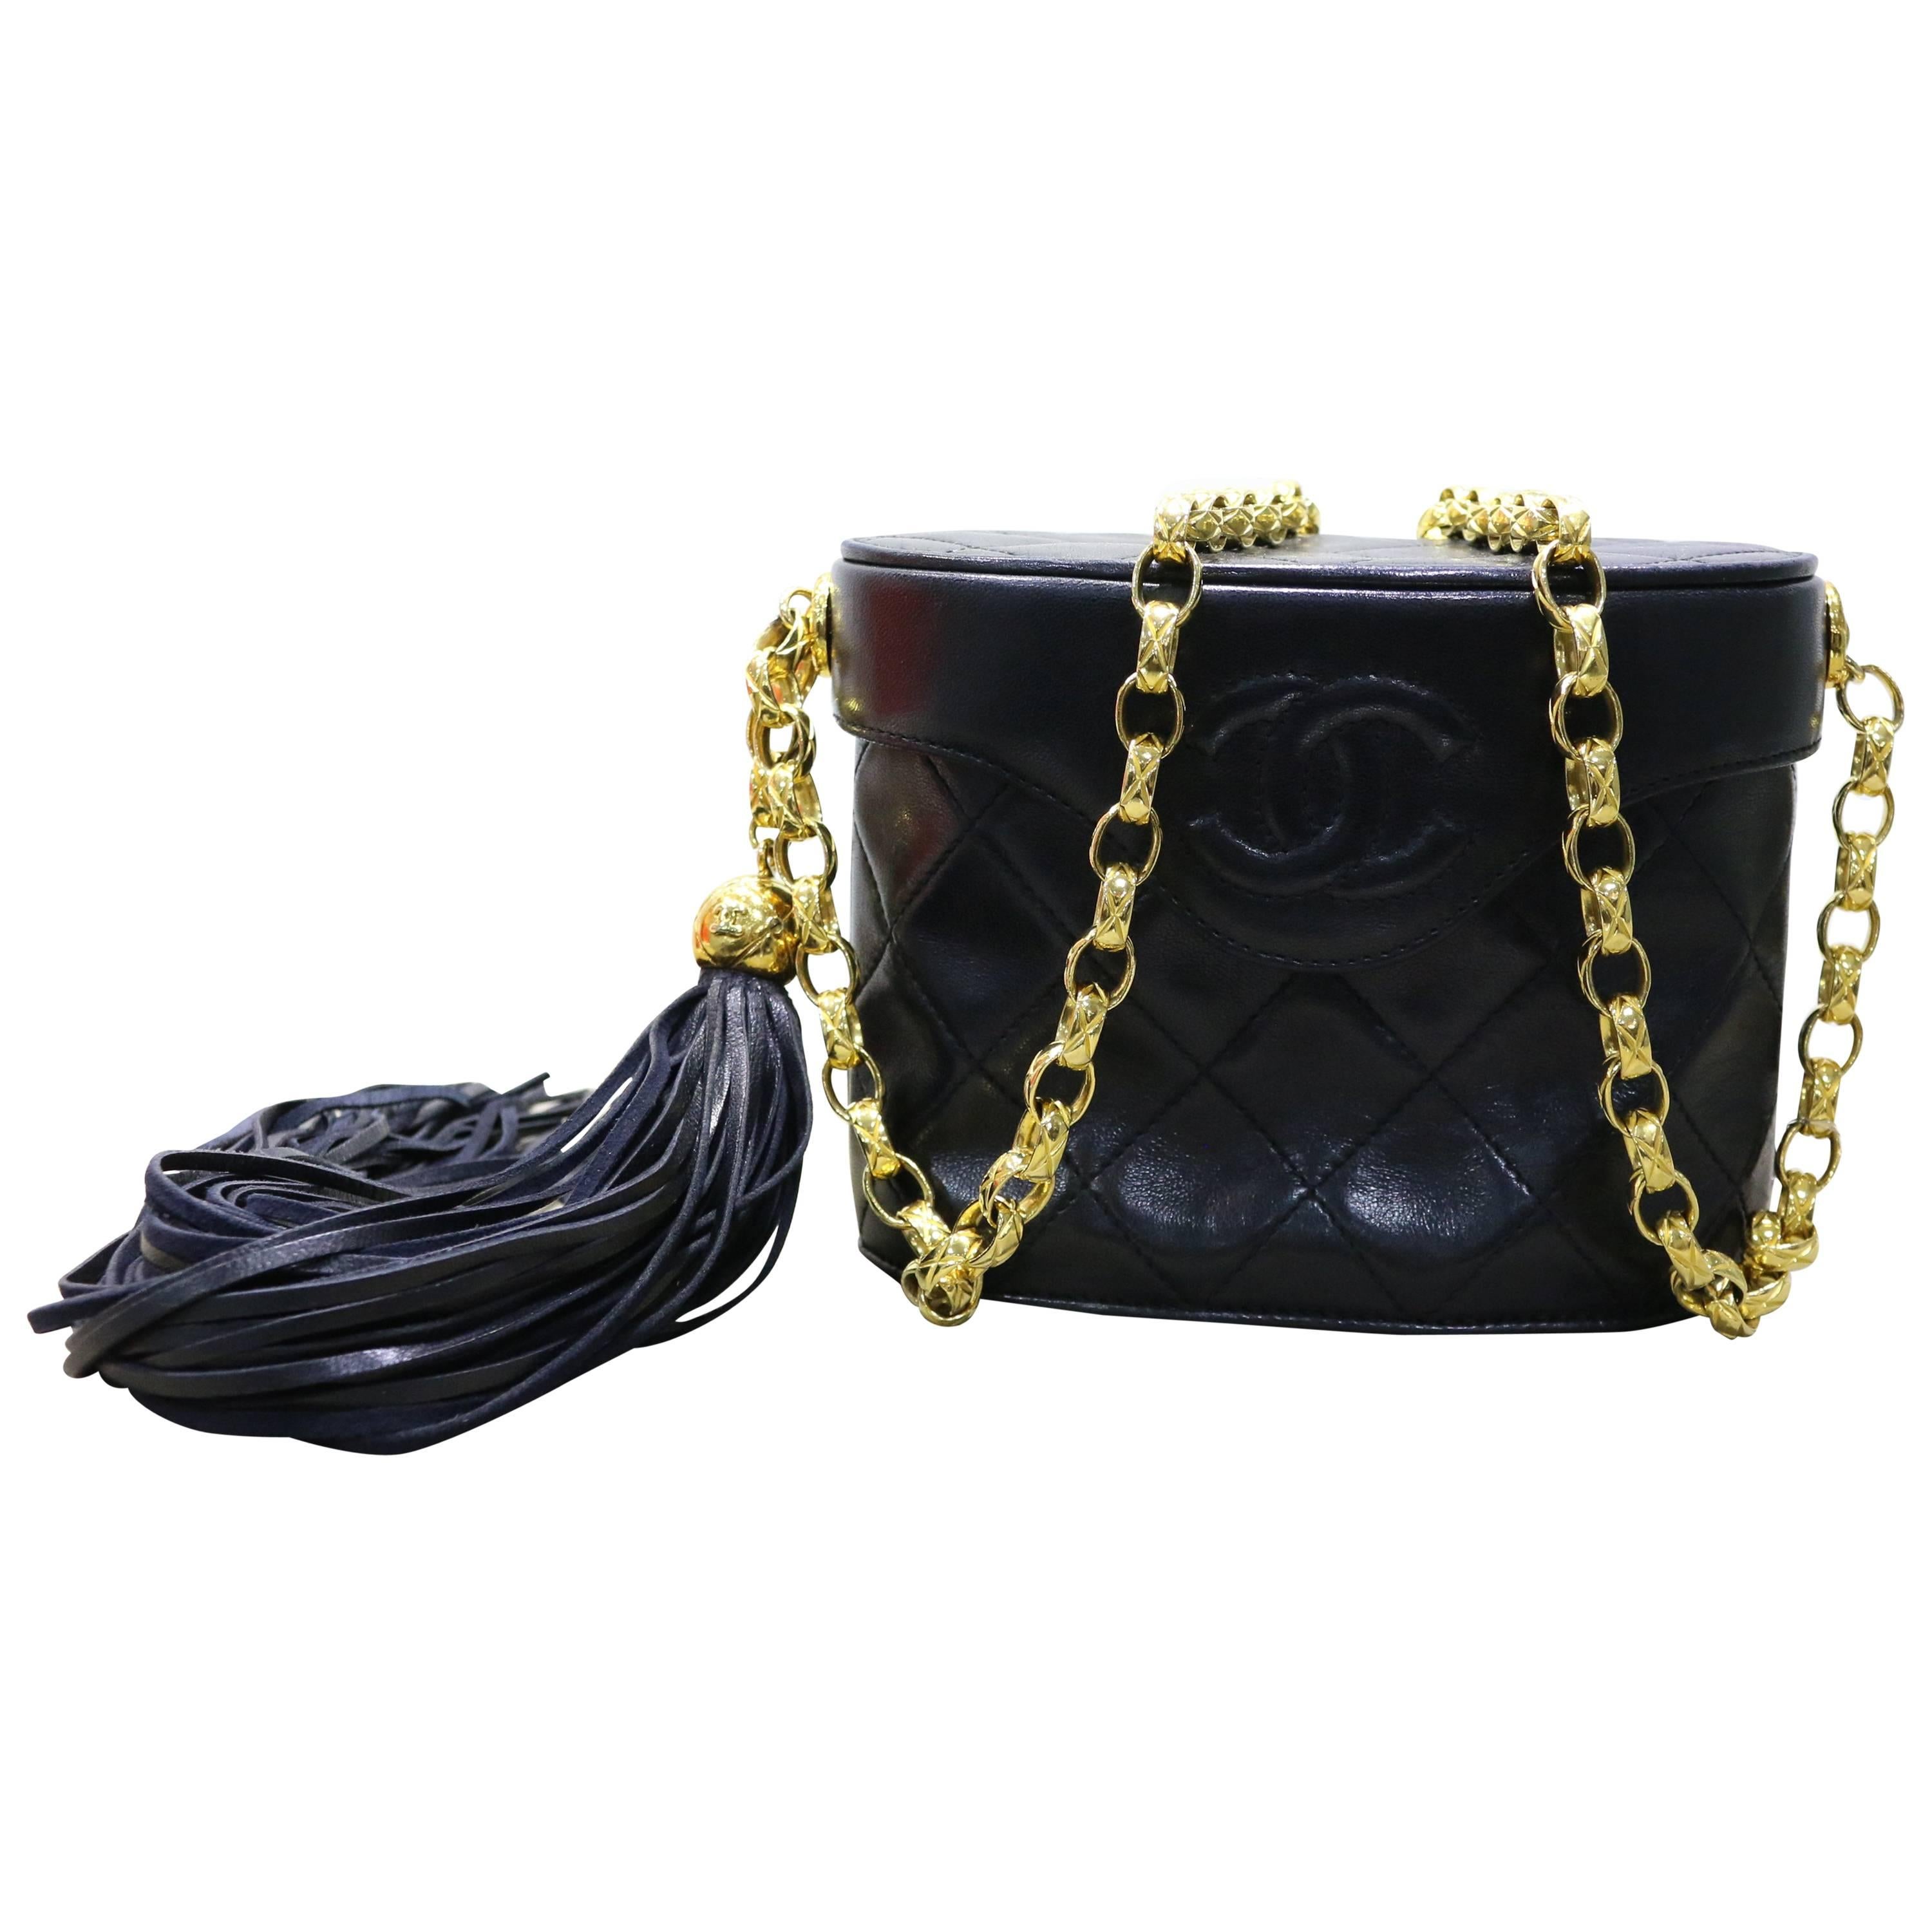 Chanel Black Quilted Lambskin "CC" Logo Gold Chain Shoulder Bag with Tassel 